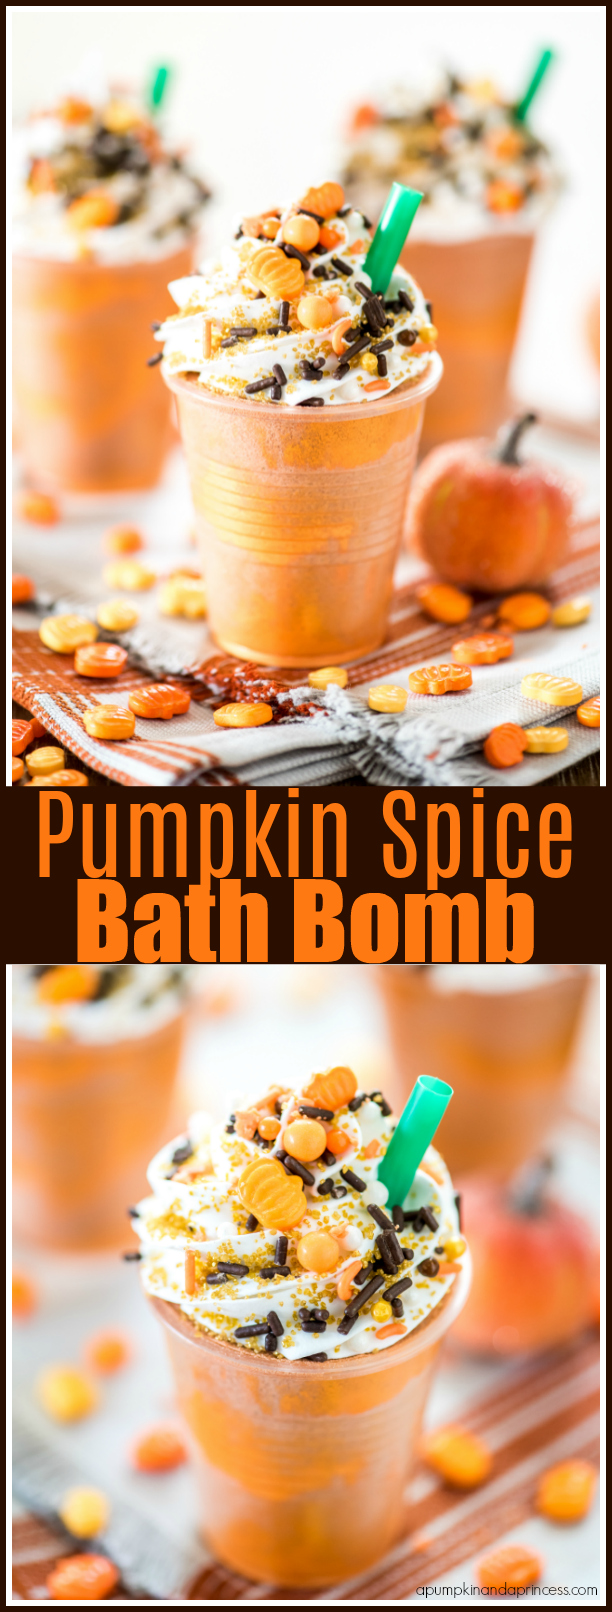 How to make your own Pumpkin Spice Bath Bombs topped with icing and sprinkles. This bath bomb makes a great handmade gift idea!